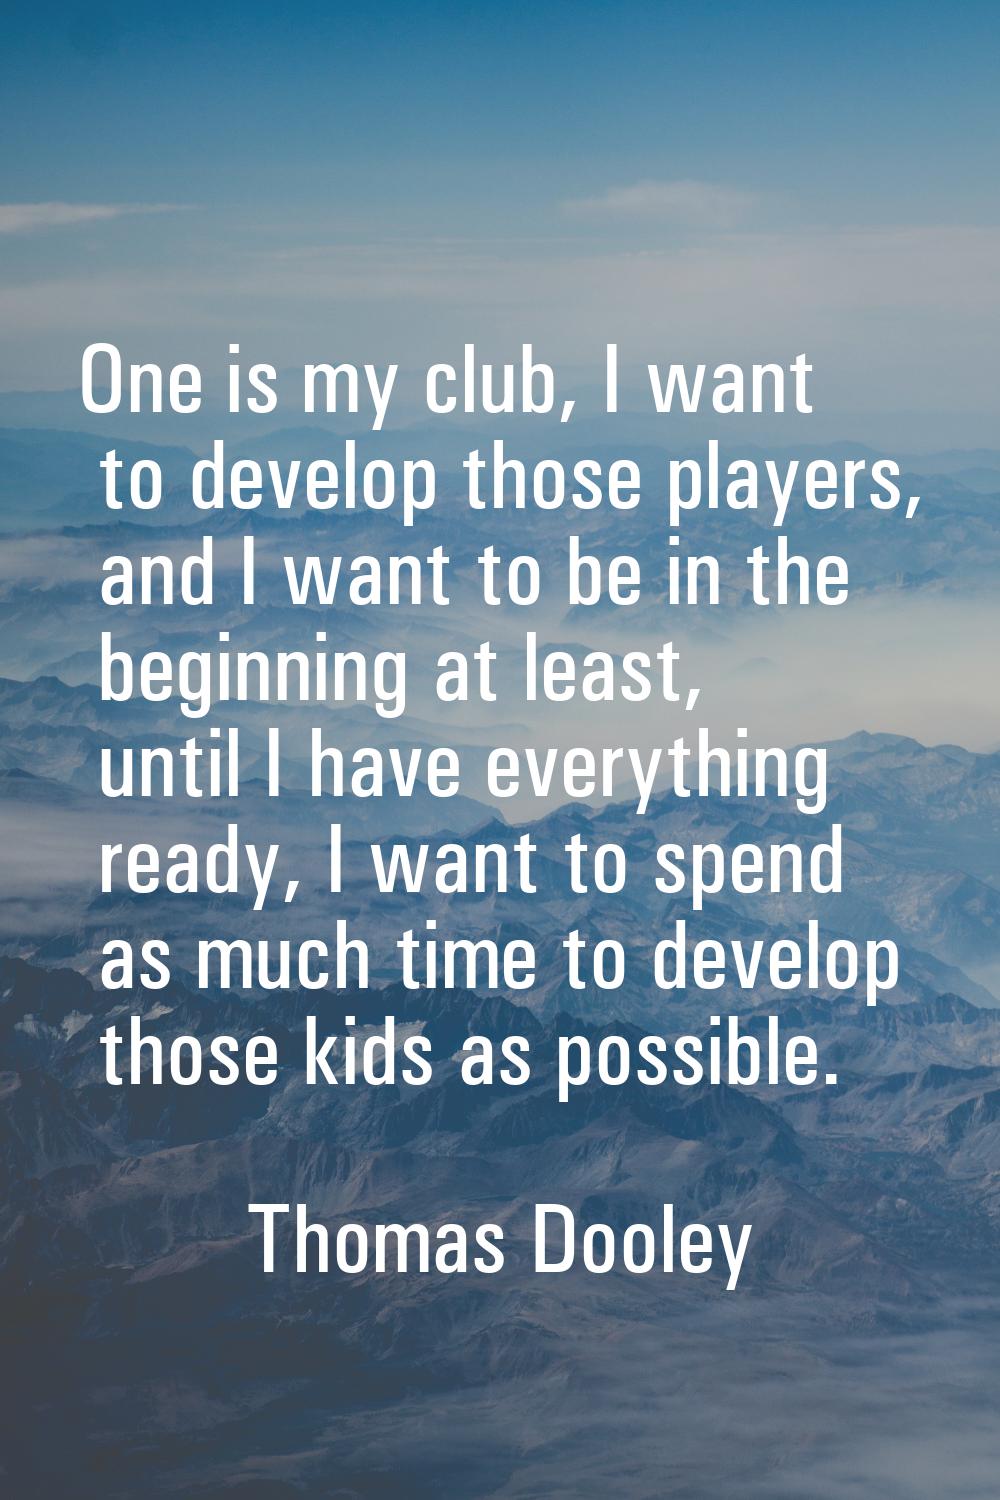 One is my club, I want to develop those players, and I want to be in the beginning at least, until 